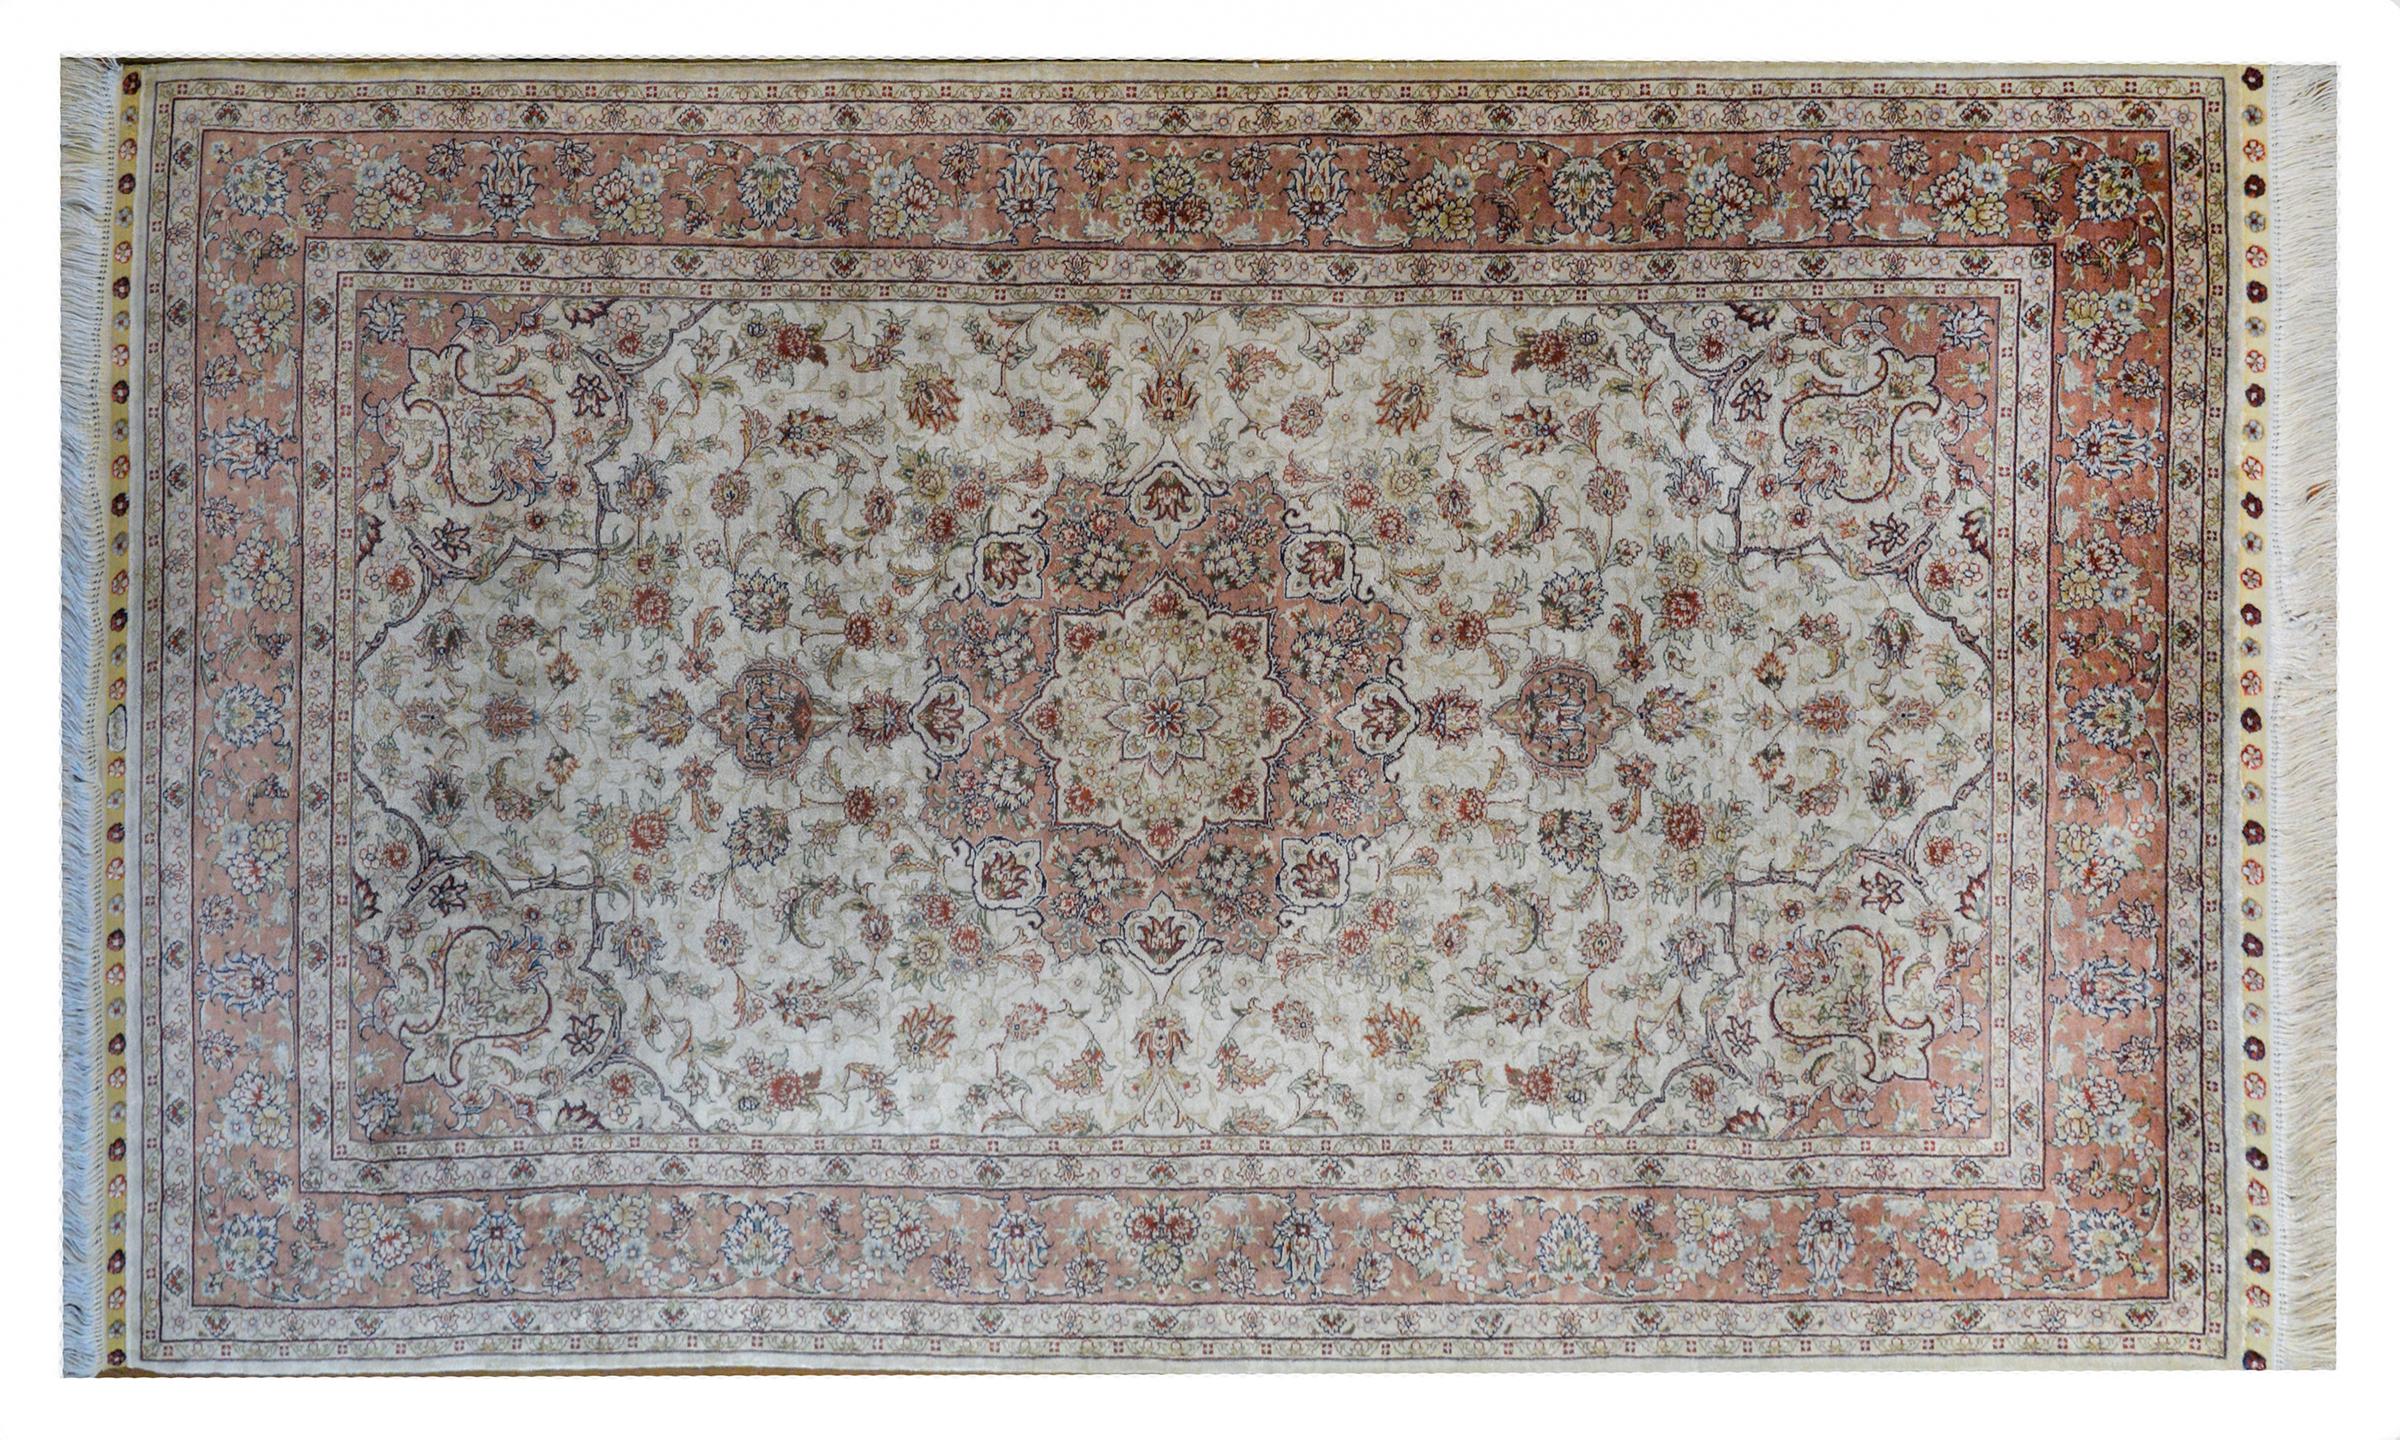 A mesmerizing vintage Egyptian silk Tabriz rug with a beautiful large central floral medallion with myriad flowers and leaves woven in crimson, indigo, yellow, pink, and white silk amidst a field of more flowers and vines against a white background.